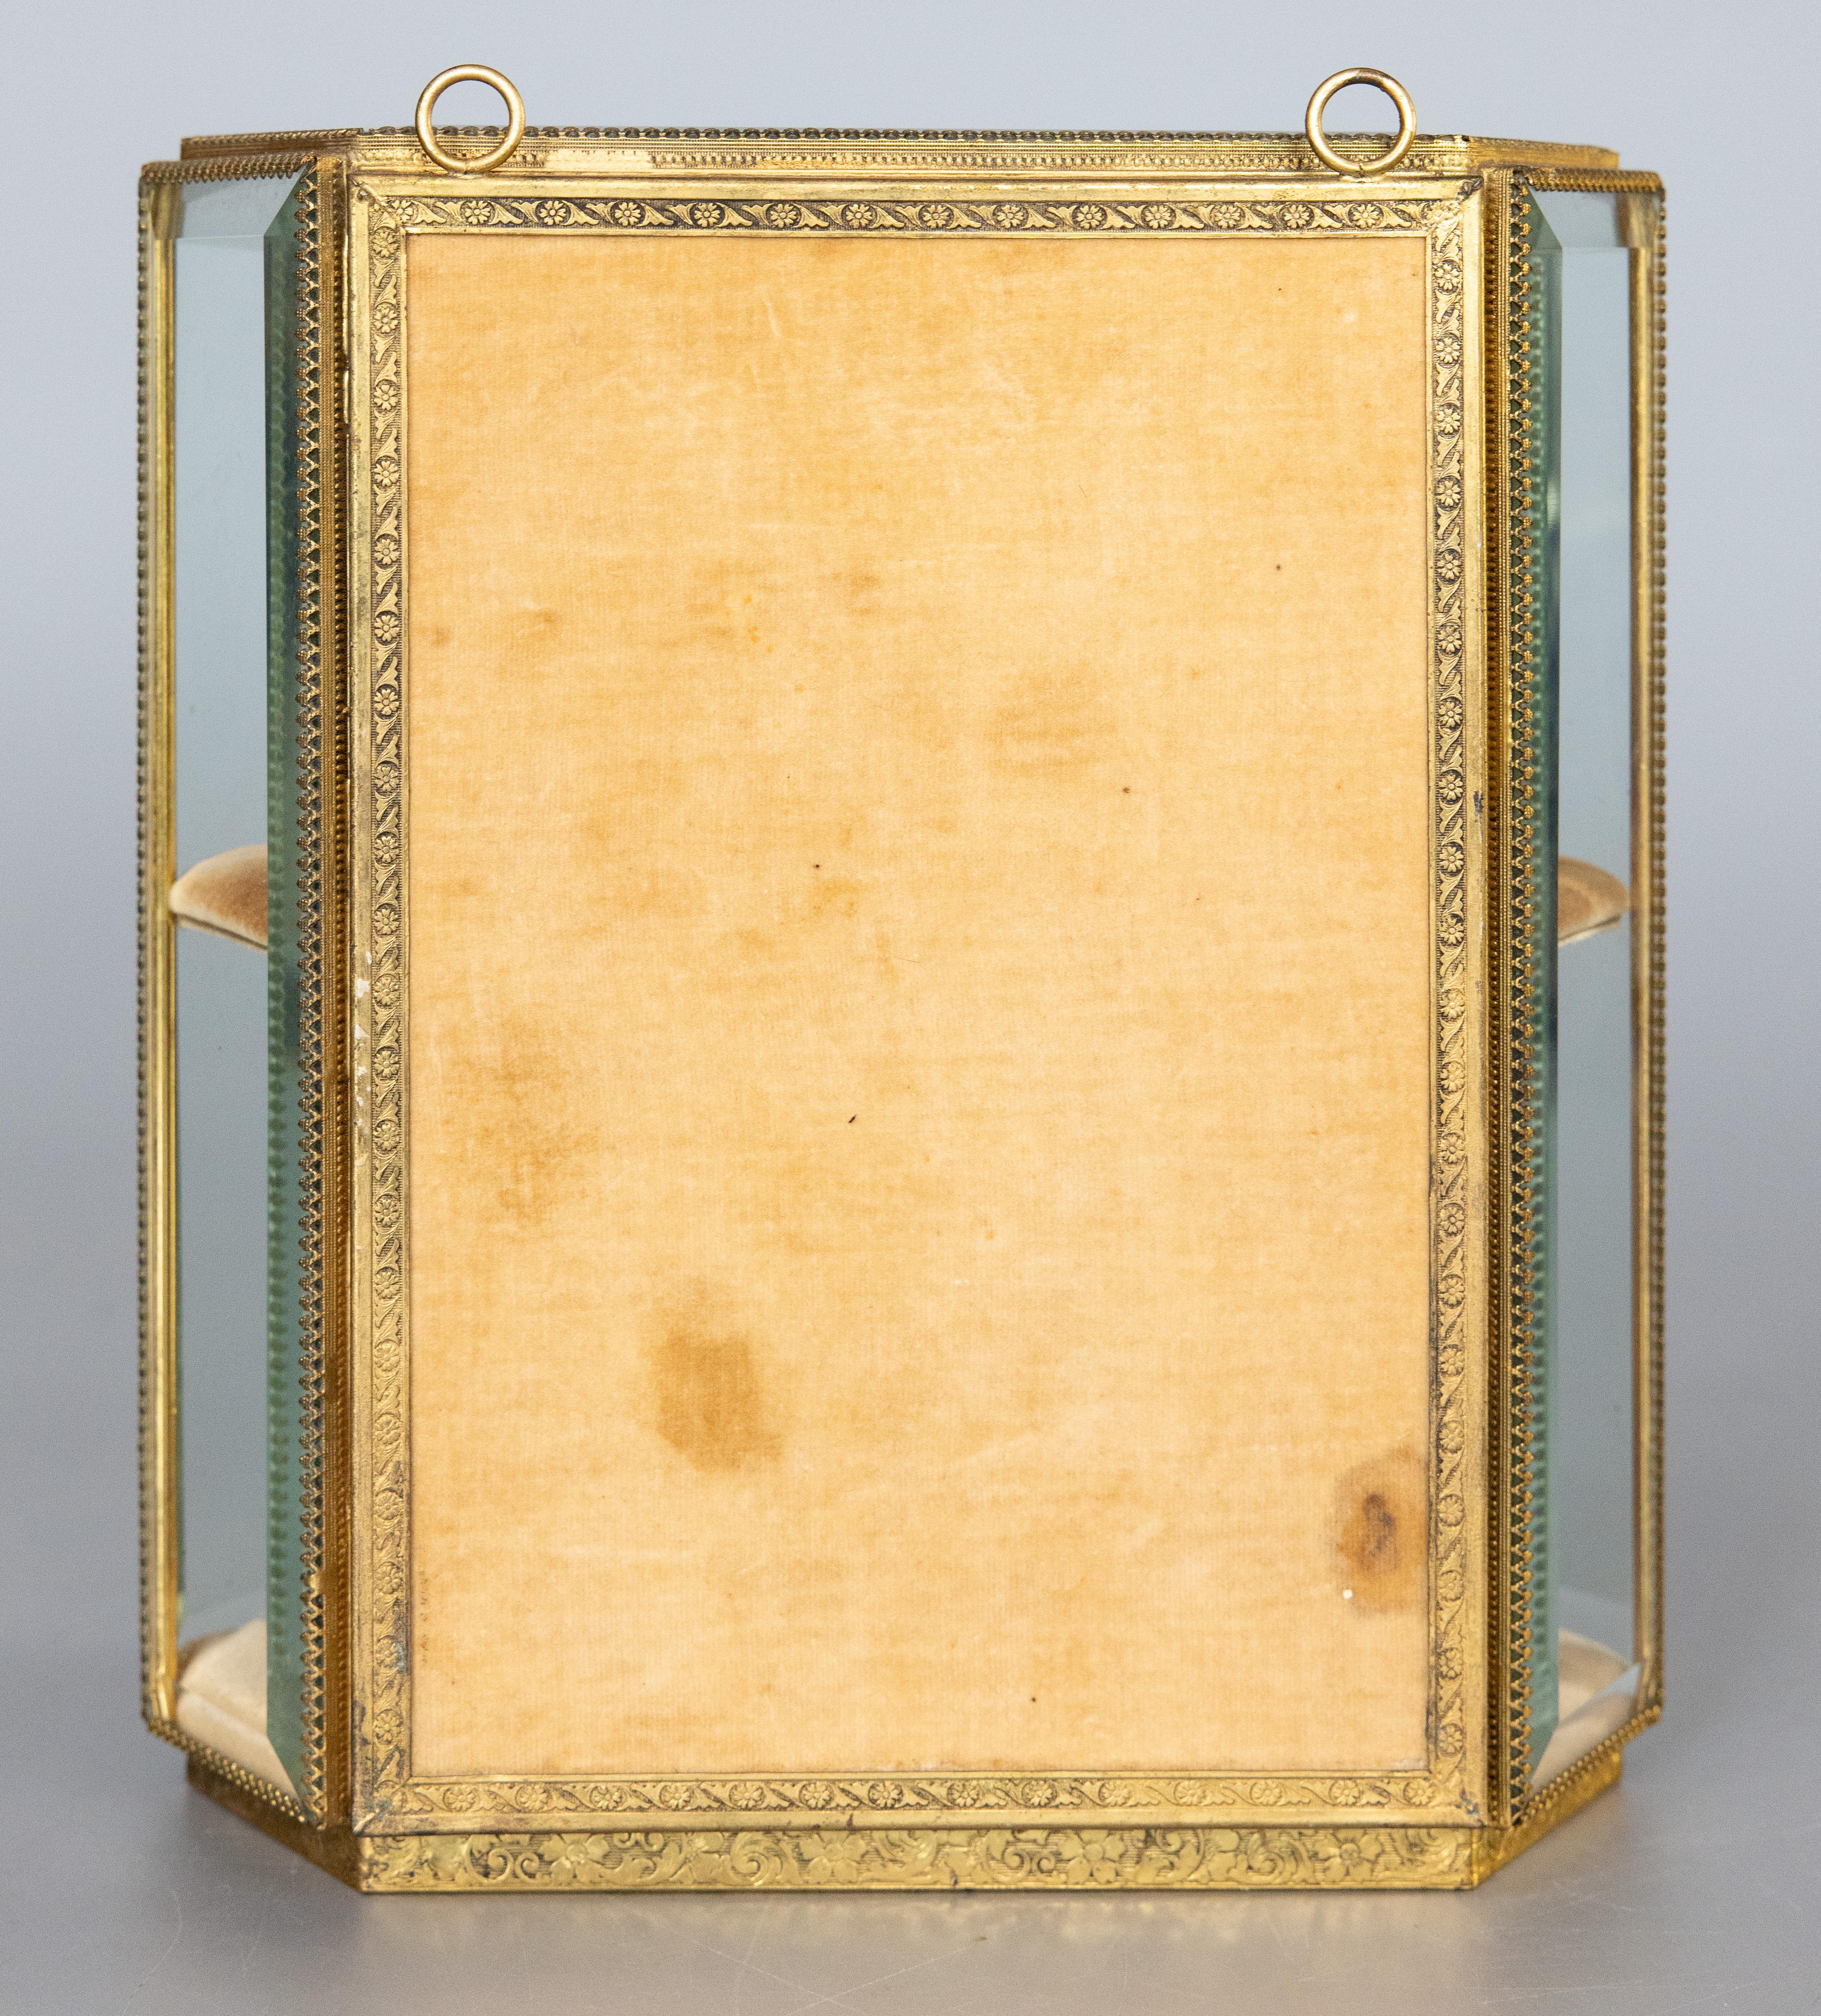 20th Century Large French Ormolu & Glass Hanging Wall Jewelry Casket Box, circa 1900 For Sale